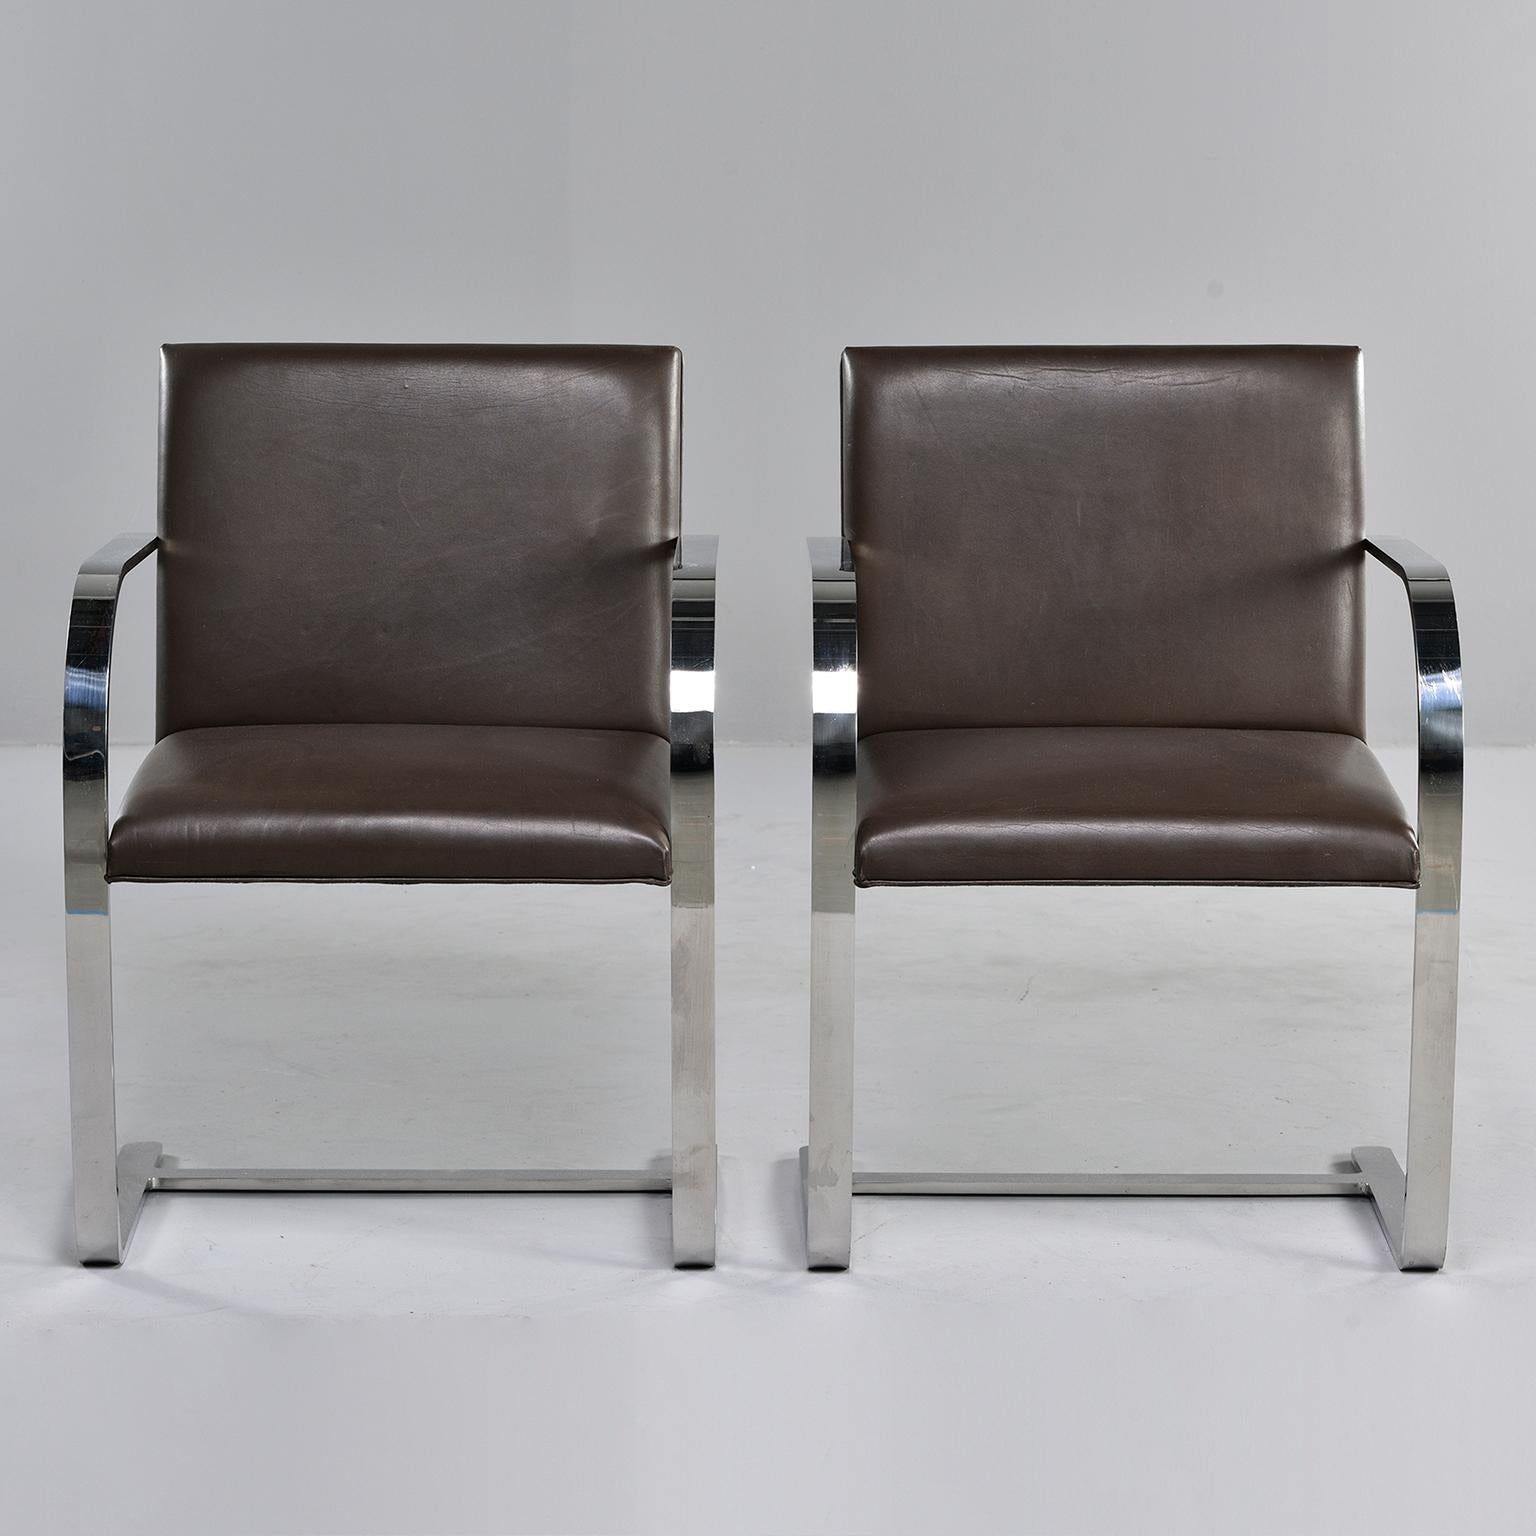 Metal Pair of Knoll Bruno Flat Bar Chairs with Leather Upholstery